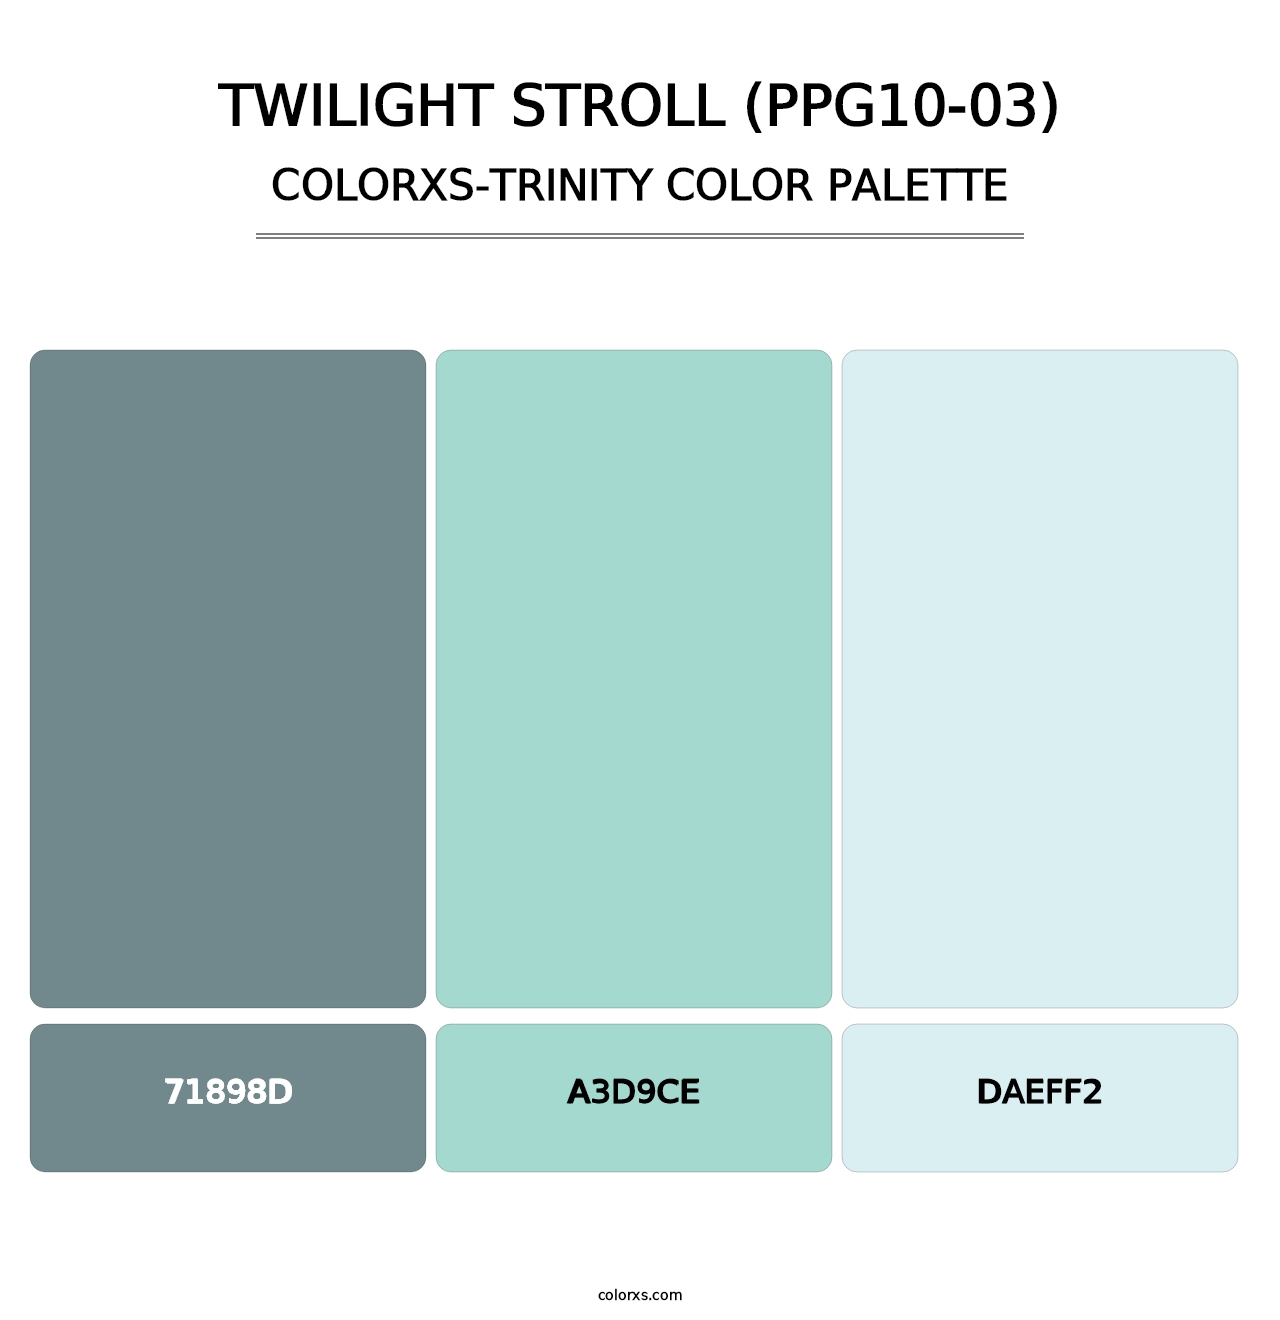 Twilight Stroll (PPG10-03) - Colorxs Trinity Palette